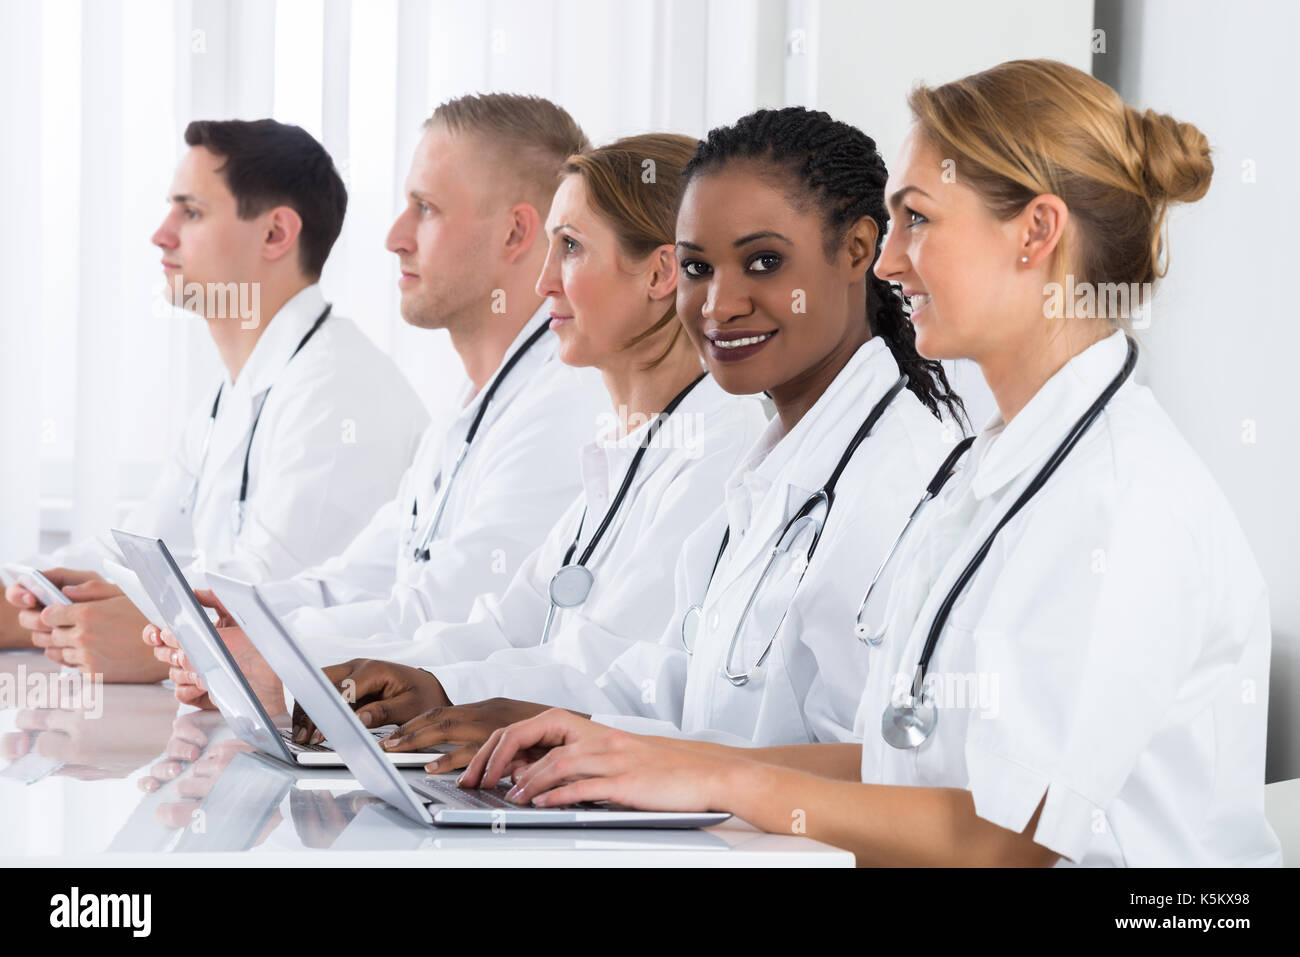 Group Of Doctors In Labcoat Using Laptop At Desk Stock Photo